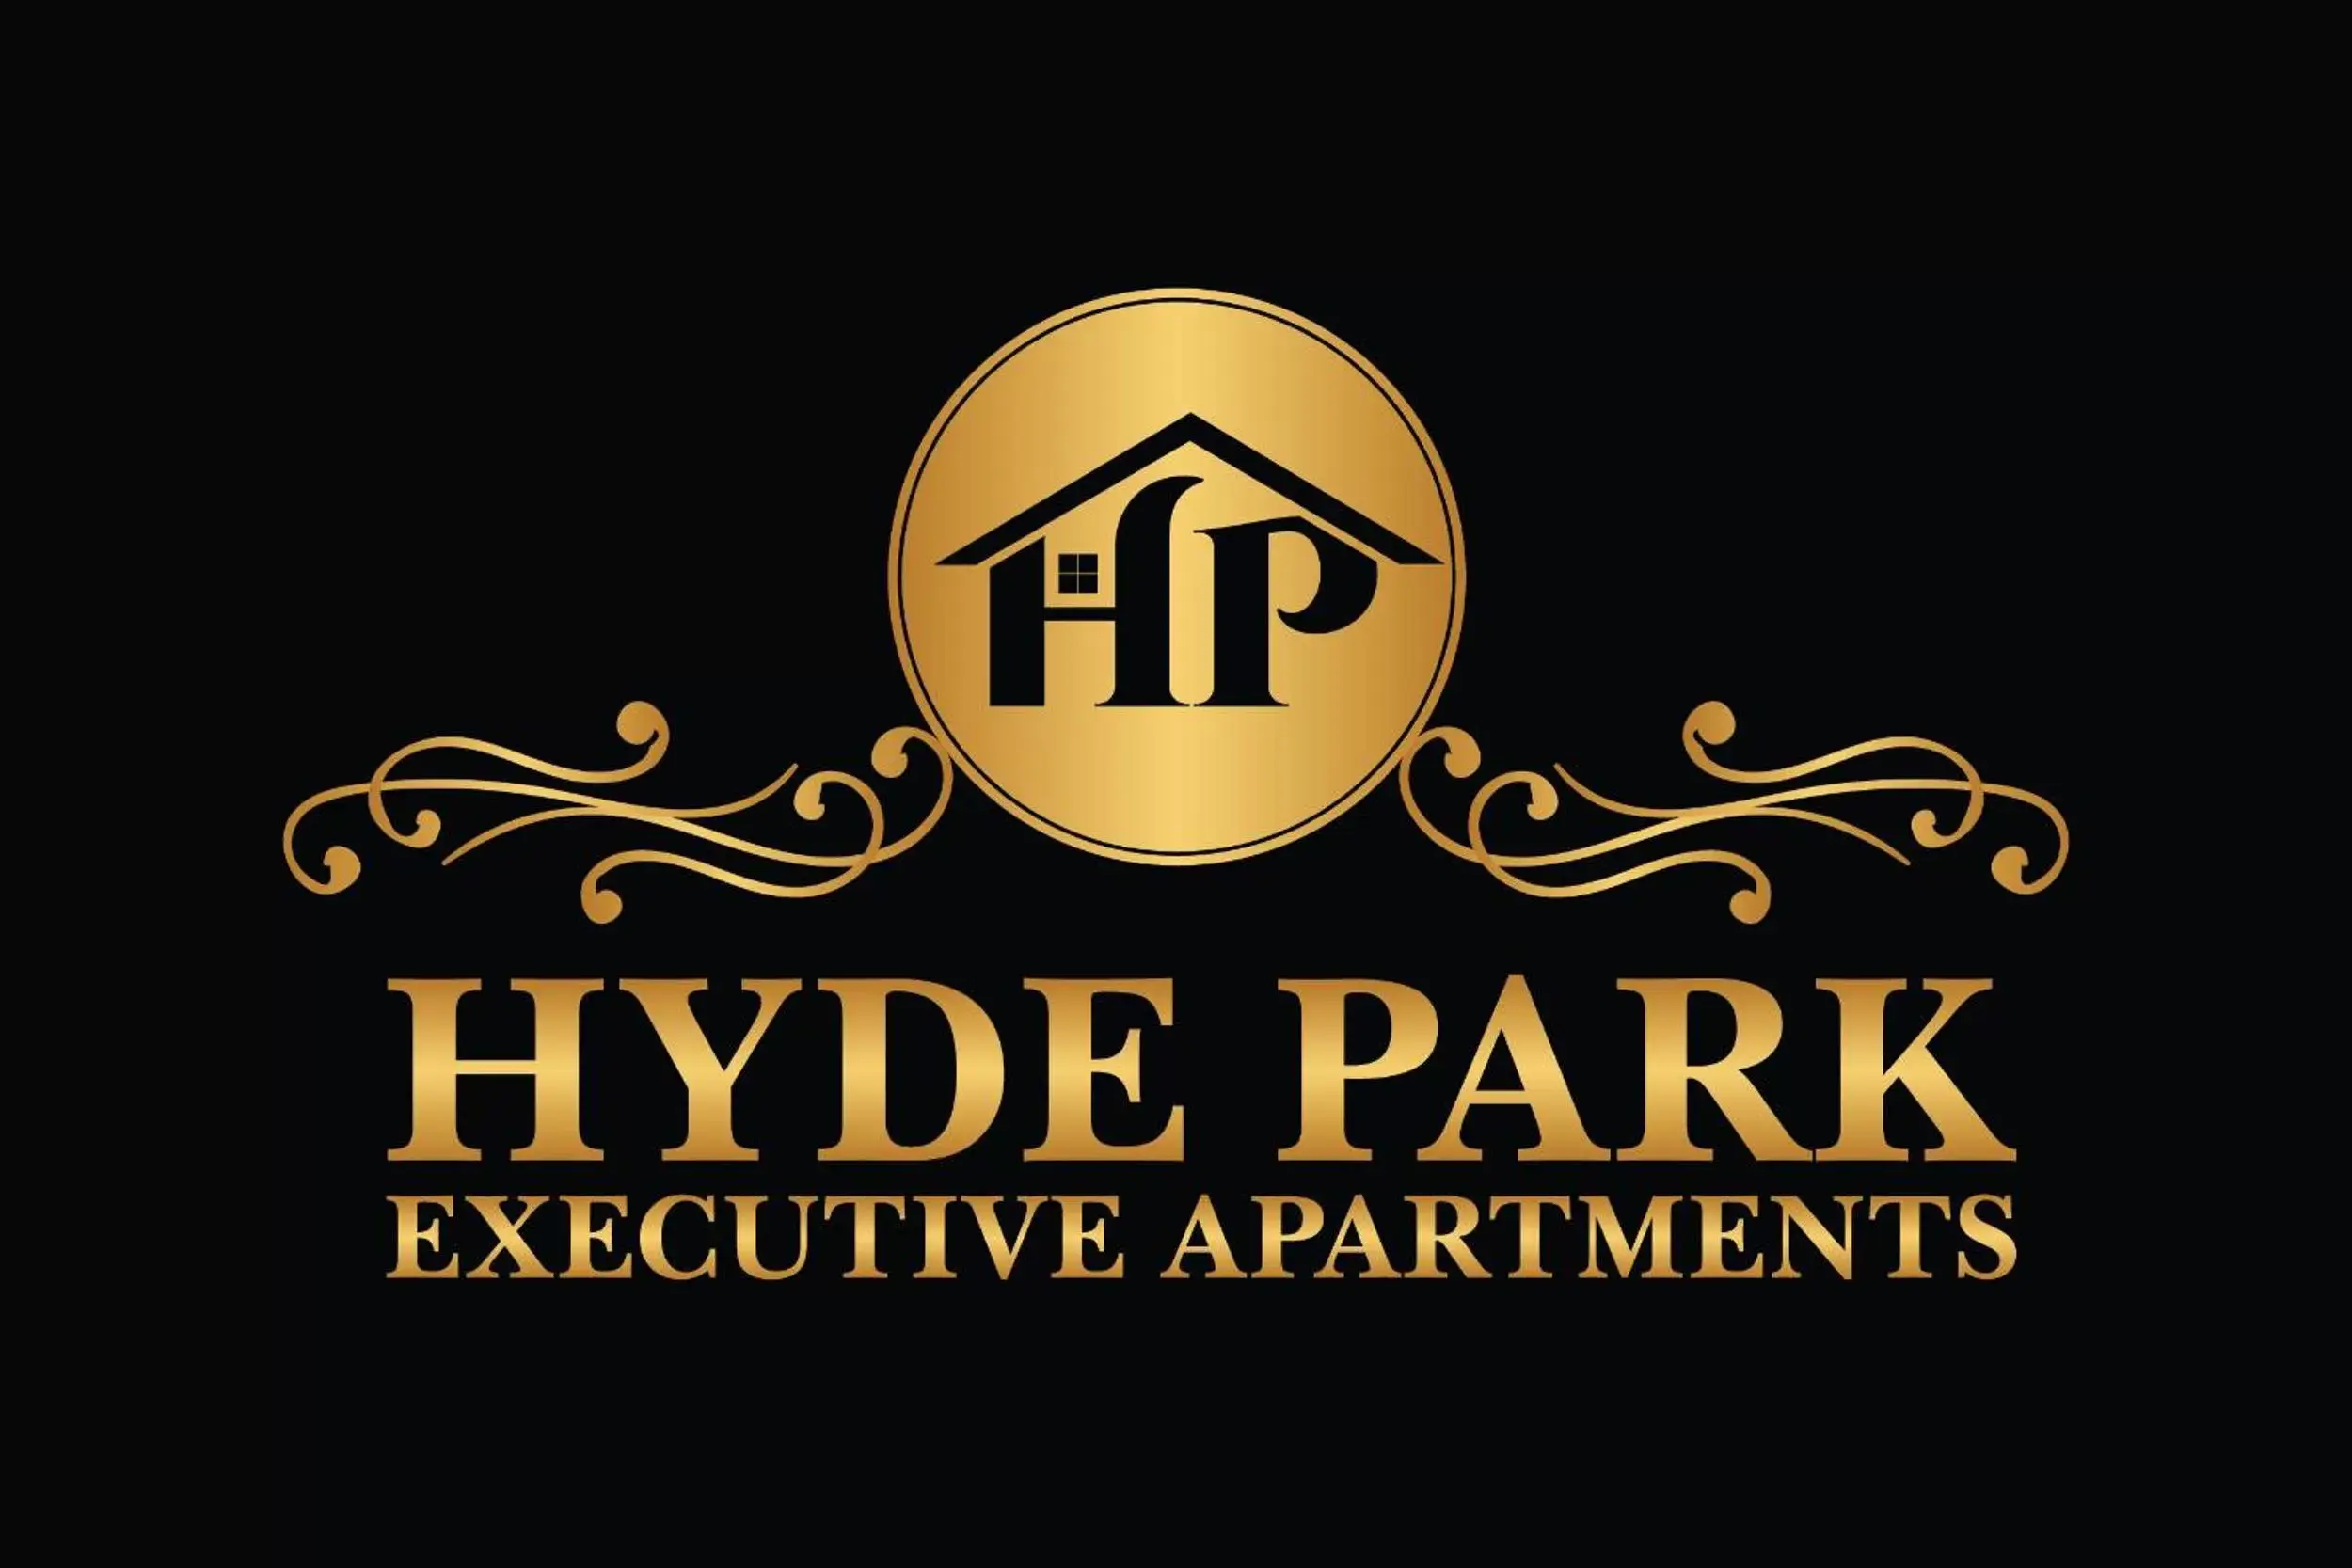 Living room, Property Logo/Sign in Hyde Park Executive Apartments